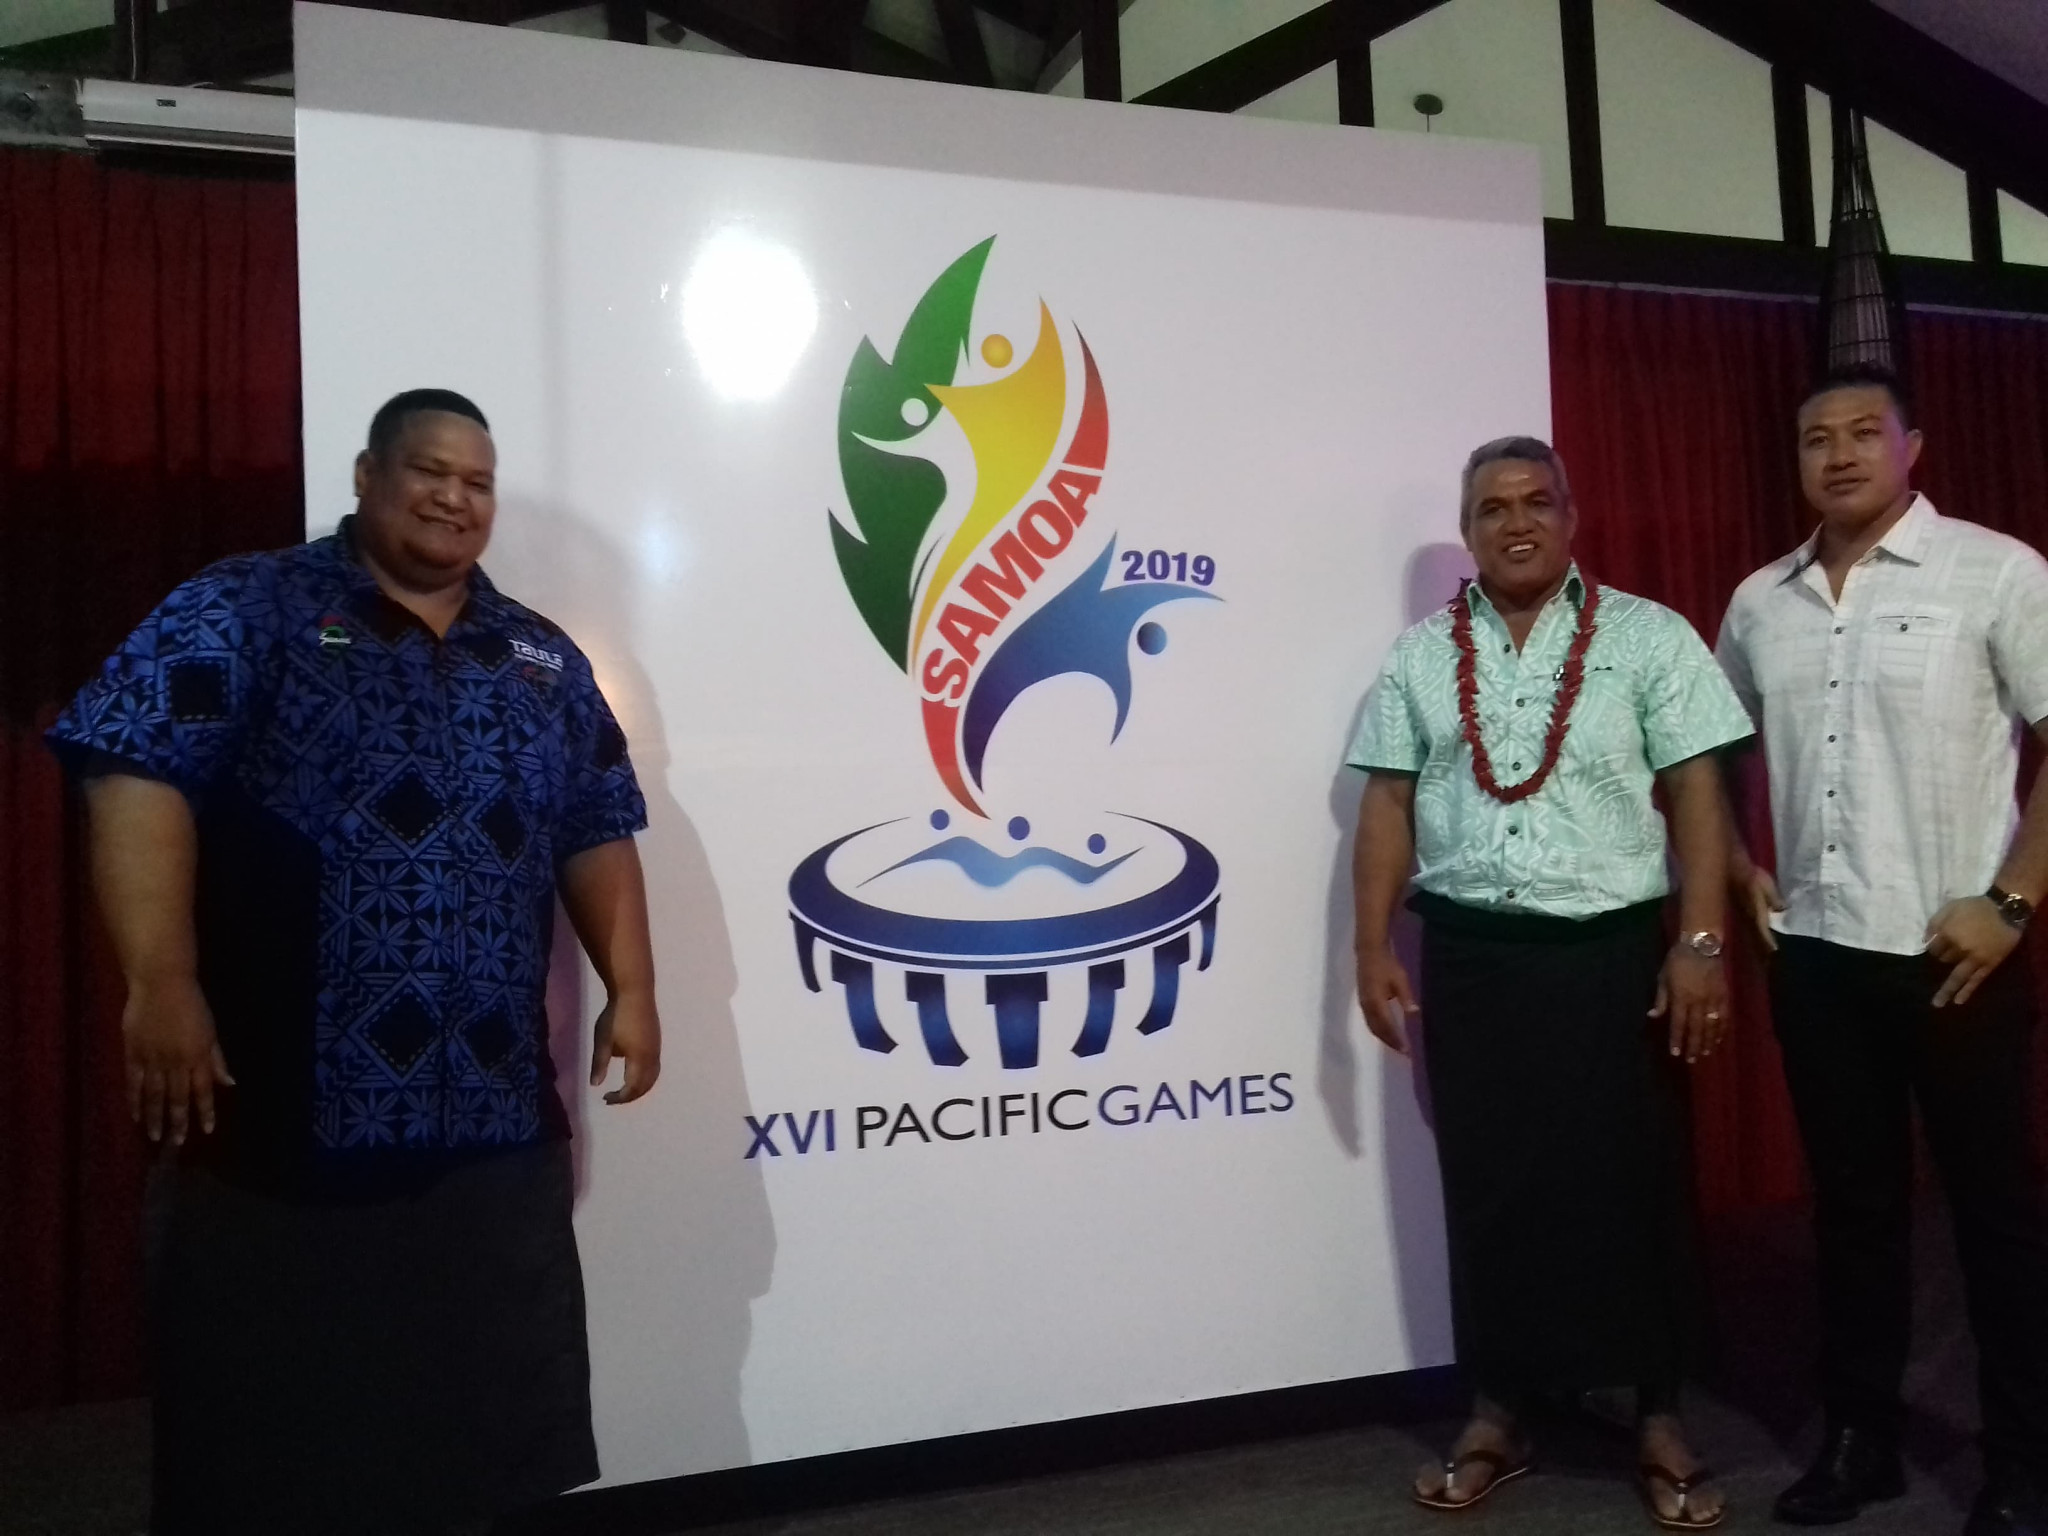 Samoa 2019 looking to use island of Savai'i as venue site with ambitious list of "firsts" revealed